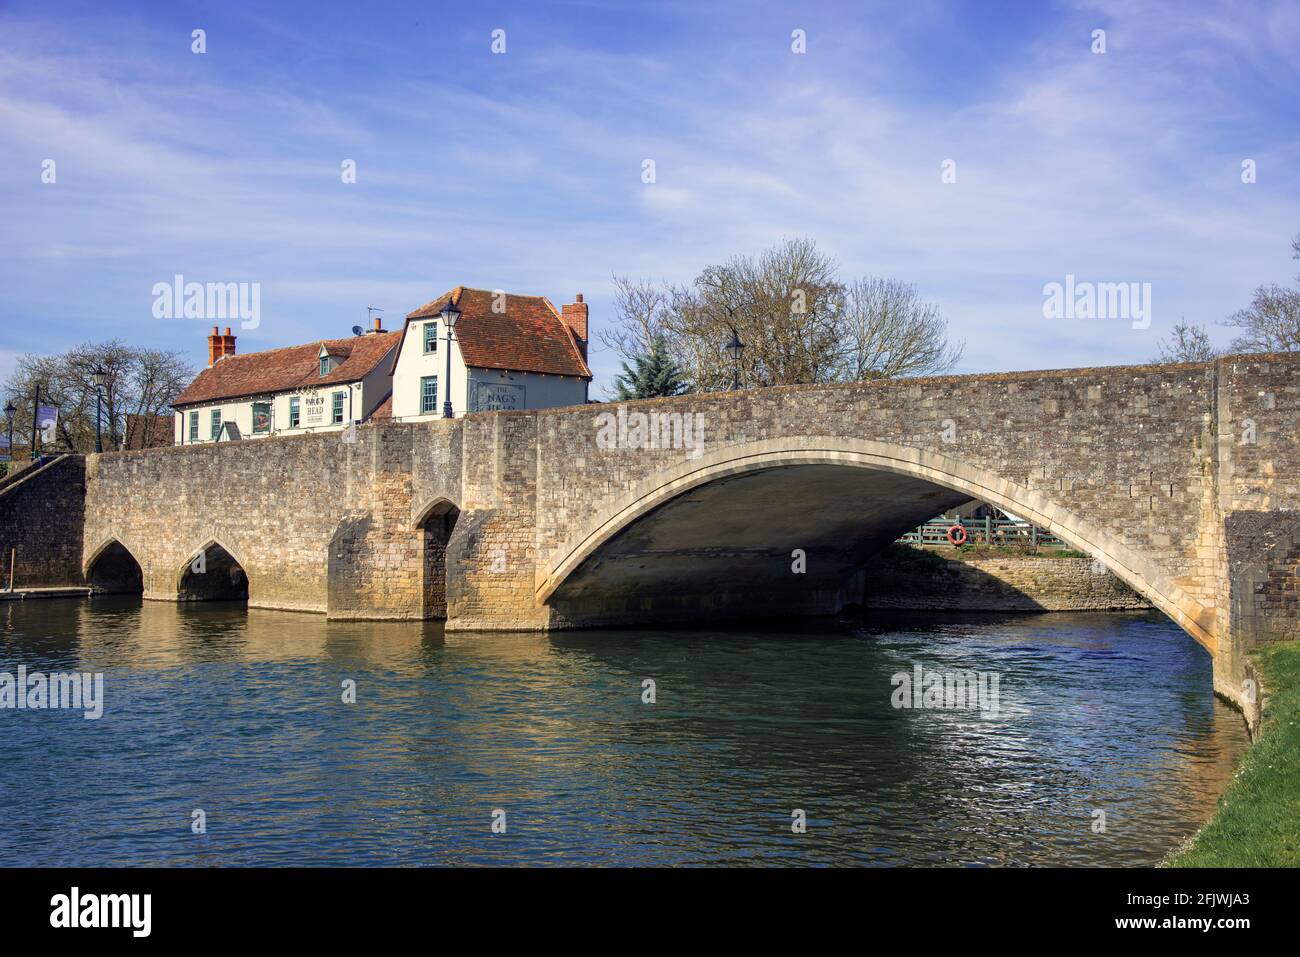 The old stone Abingdon Bridge spanning the River Thames with the Nags Head Public House - Abingdon, Oxfordshire, England, UK Stock Photo